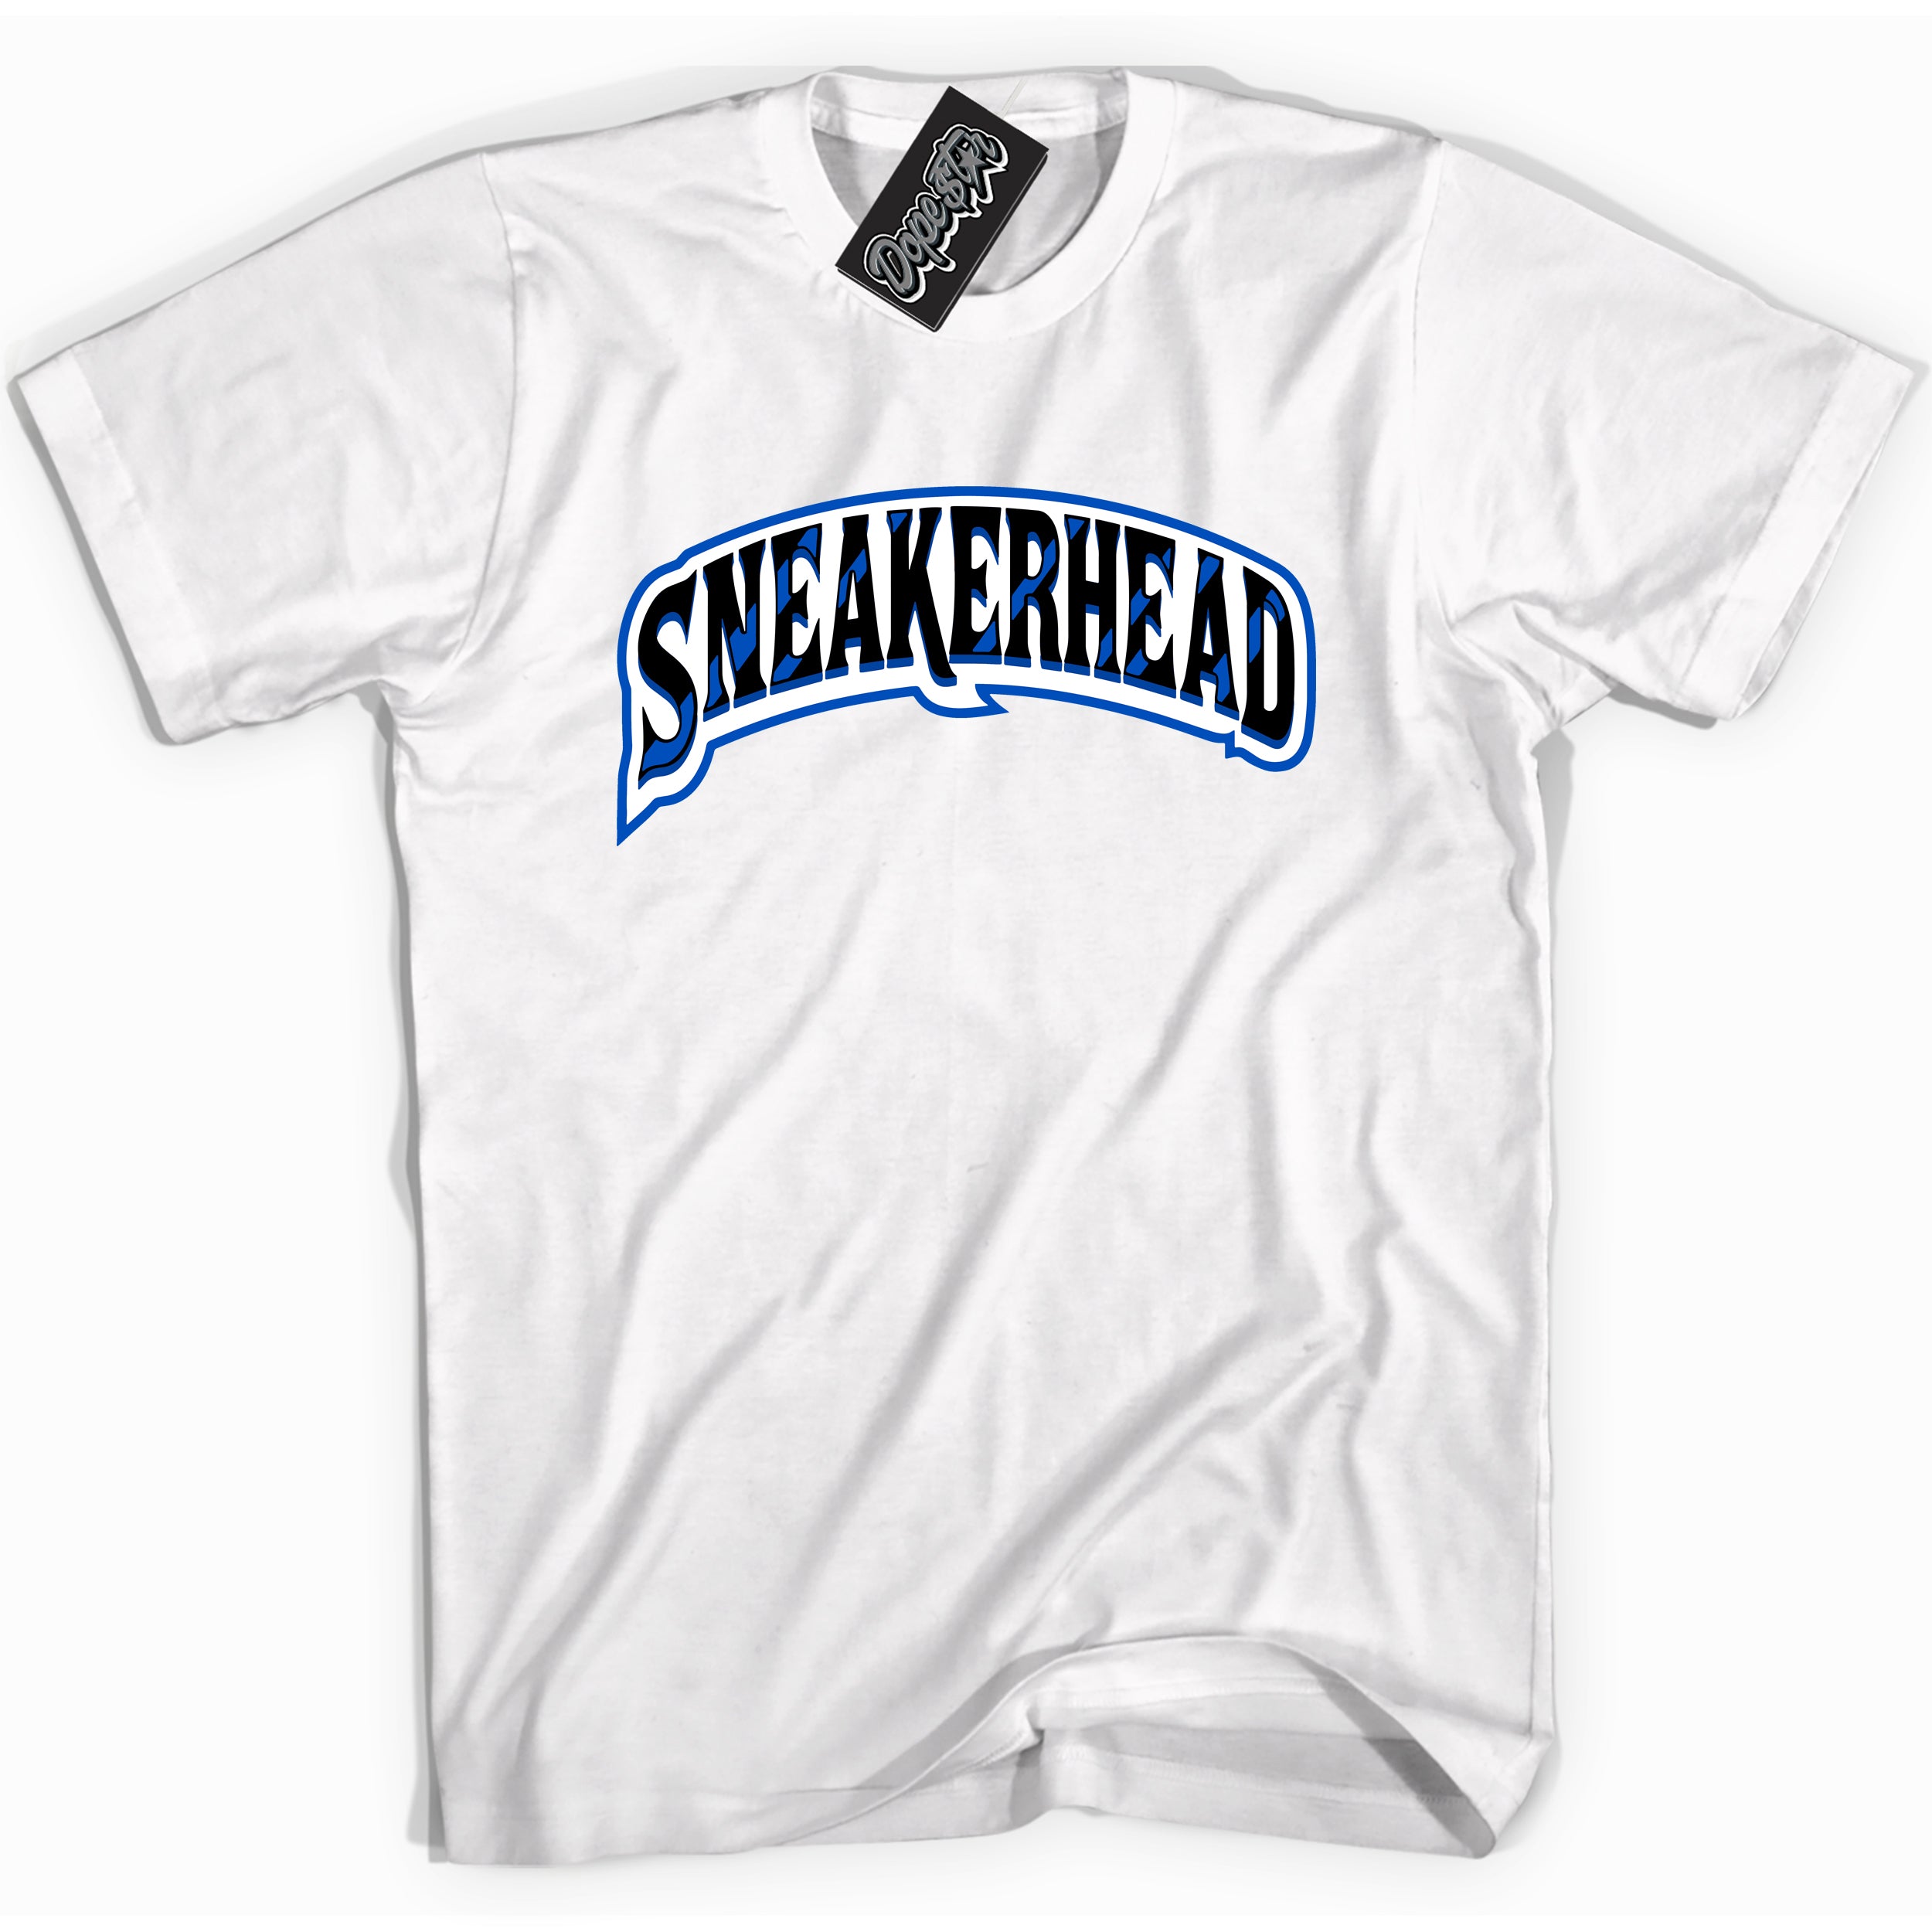 Cool White graphic tee with Sneakerhead print, that perfectly matches OG Royal Reimagined 1s sneakers 